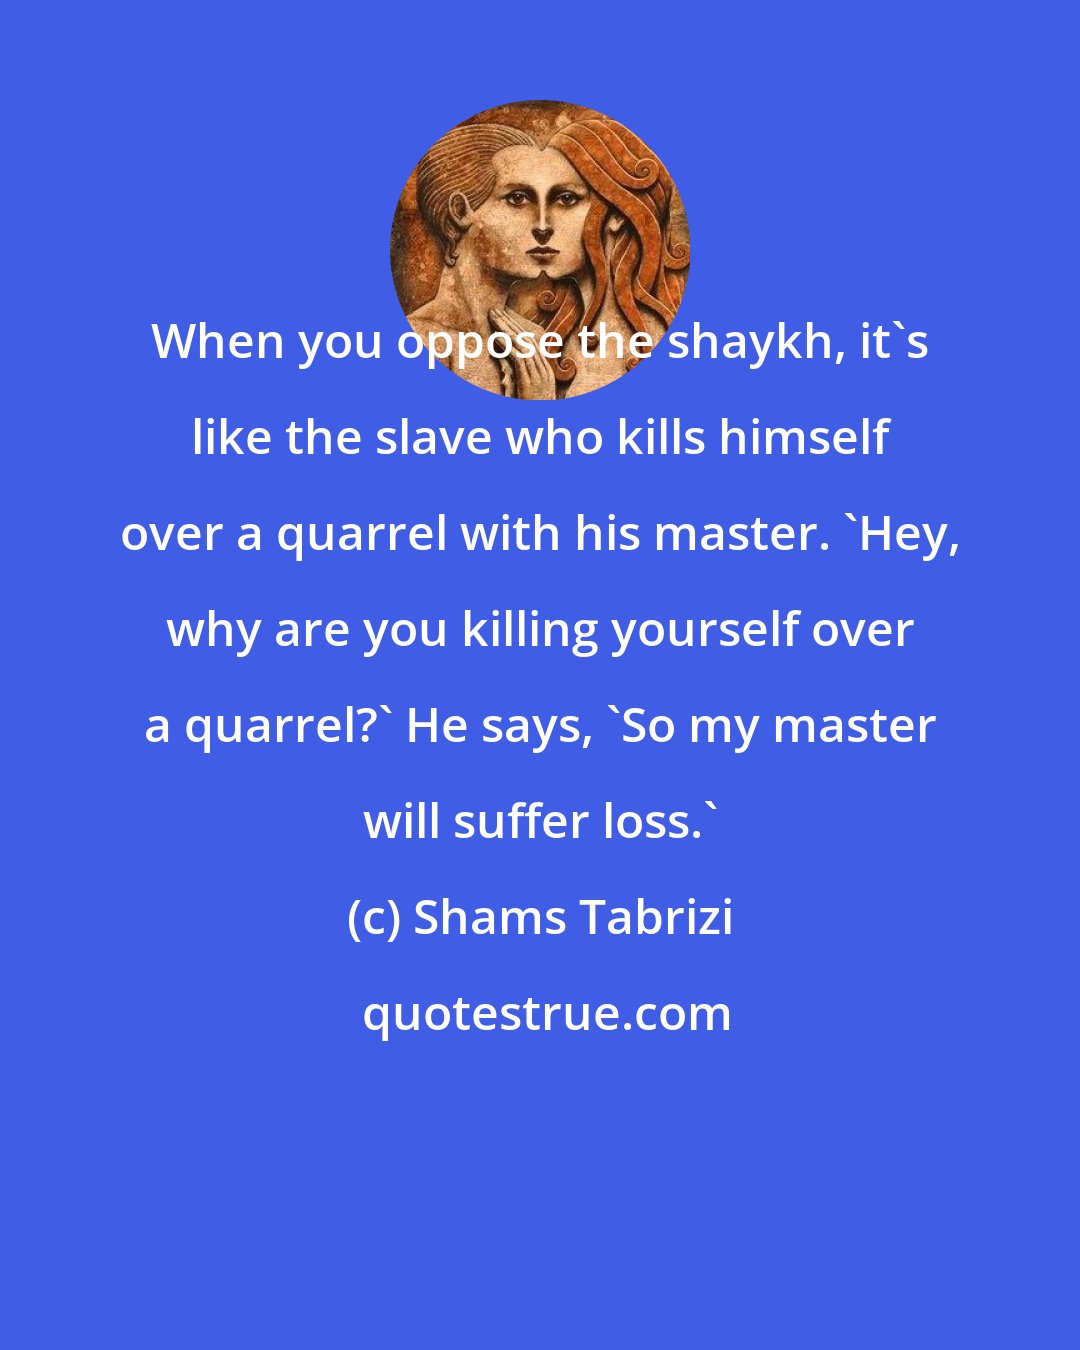 Shams Tabrizi: When you oppose the shaykh, it's like the slave who kills himself over a quarrel with his master. 'Hey, why are you killing yourself over a quarrel?' He says, 'So my master will suffer loss.'